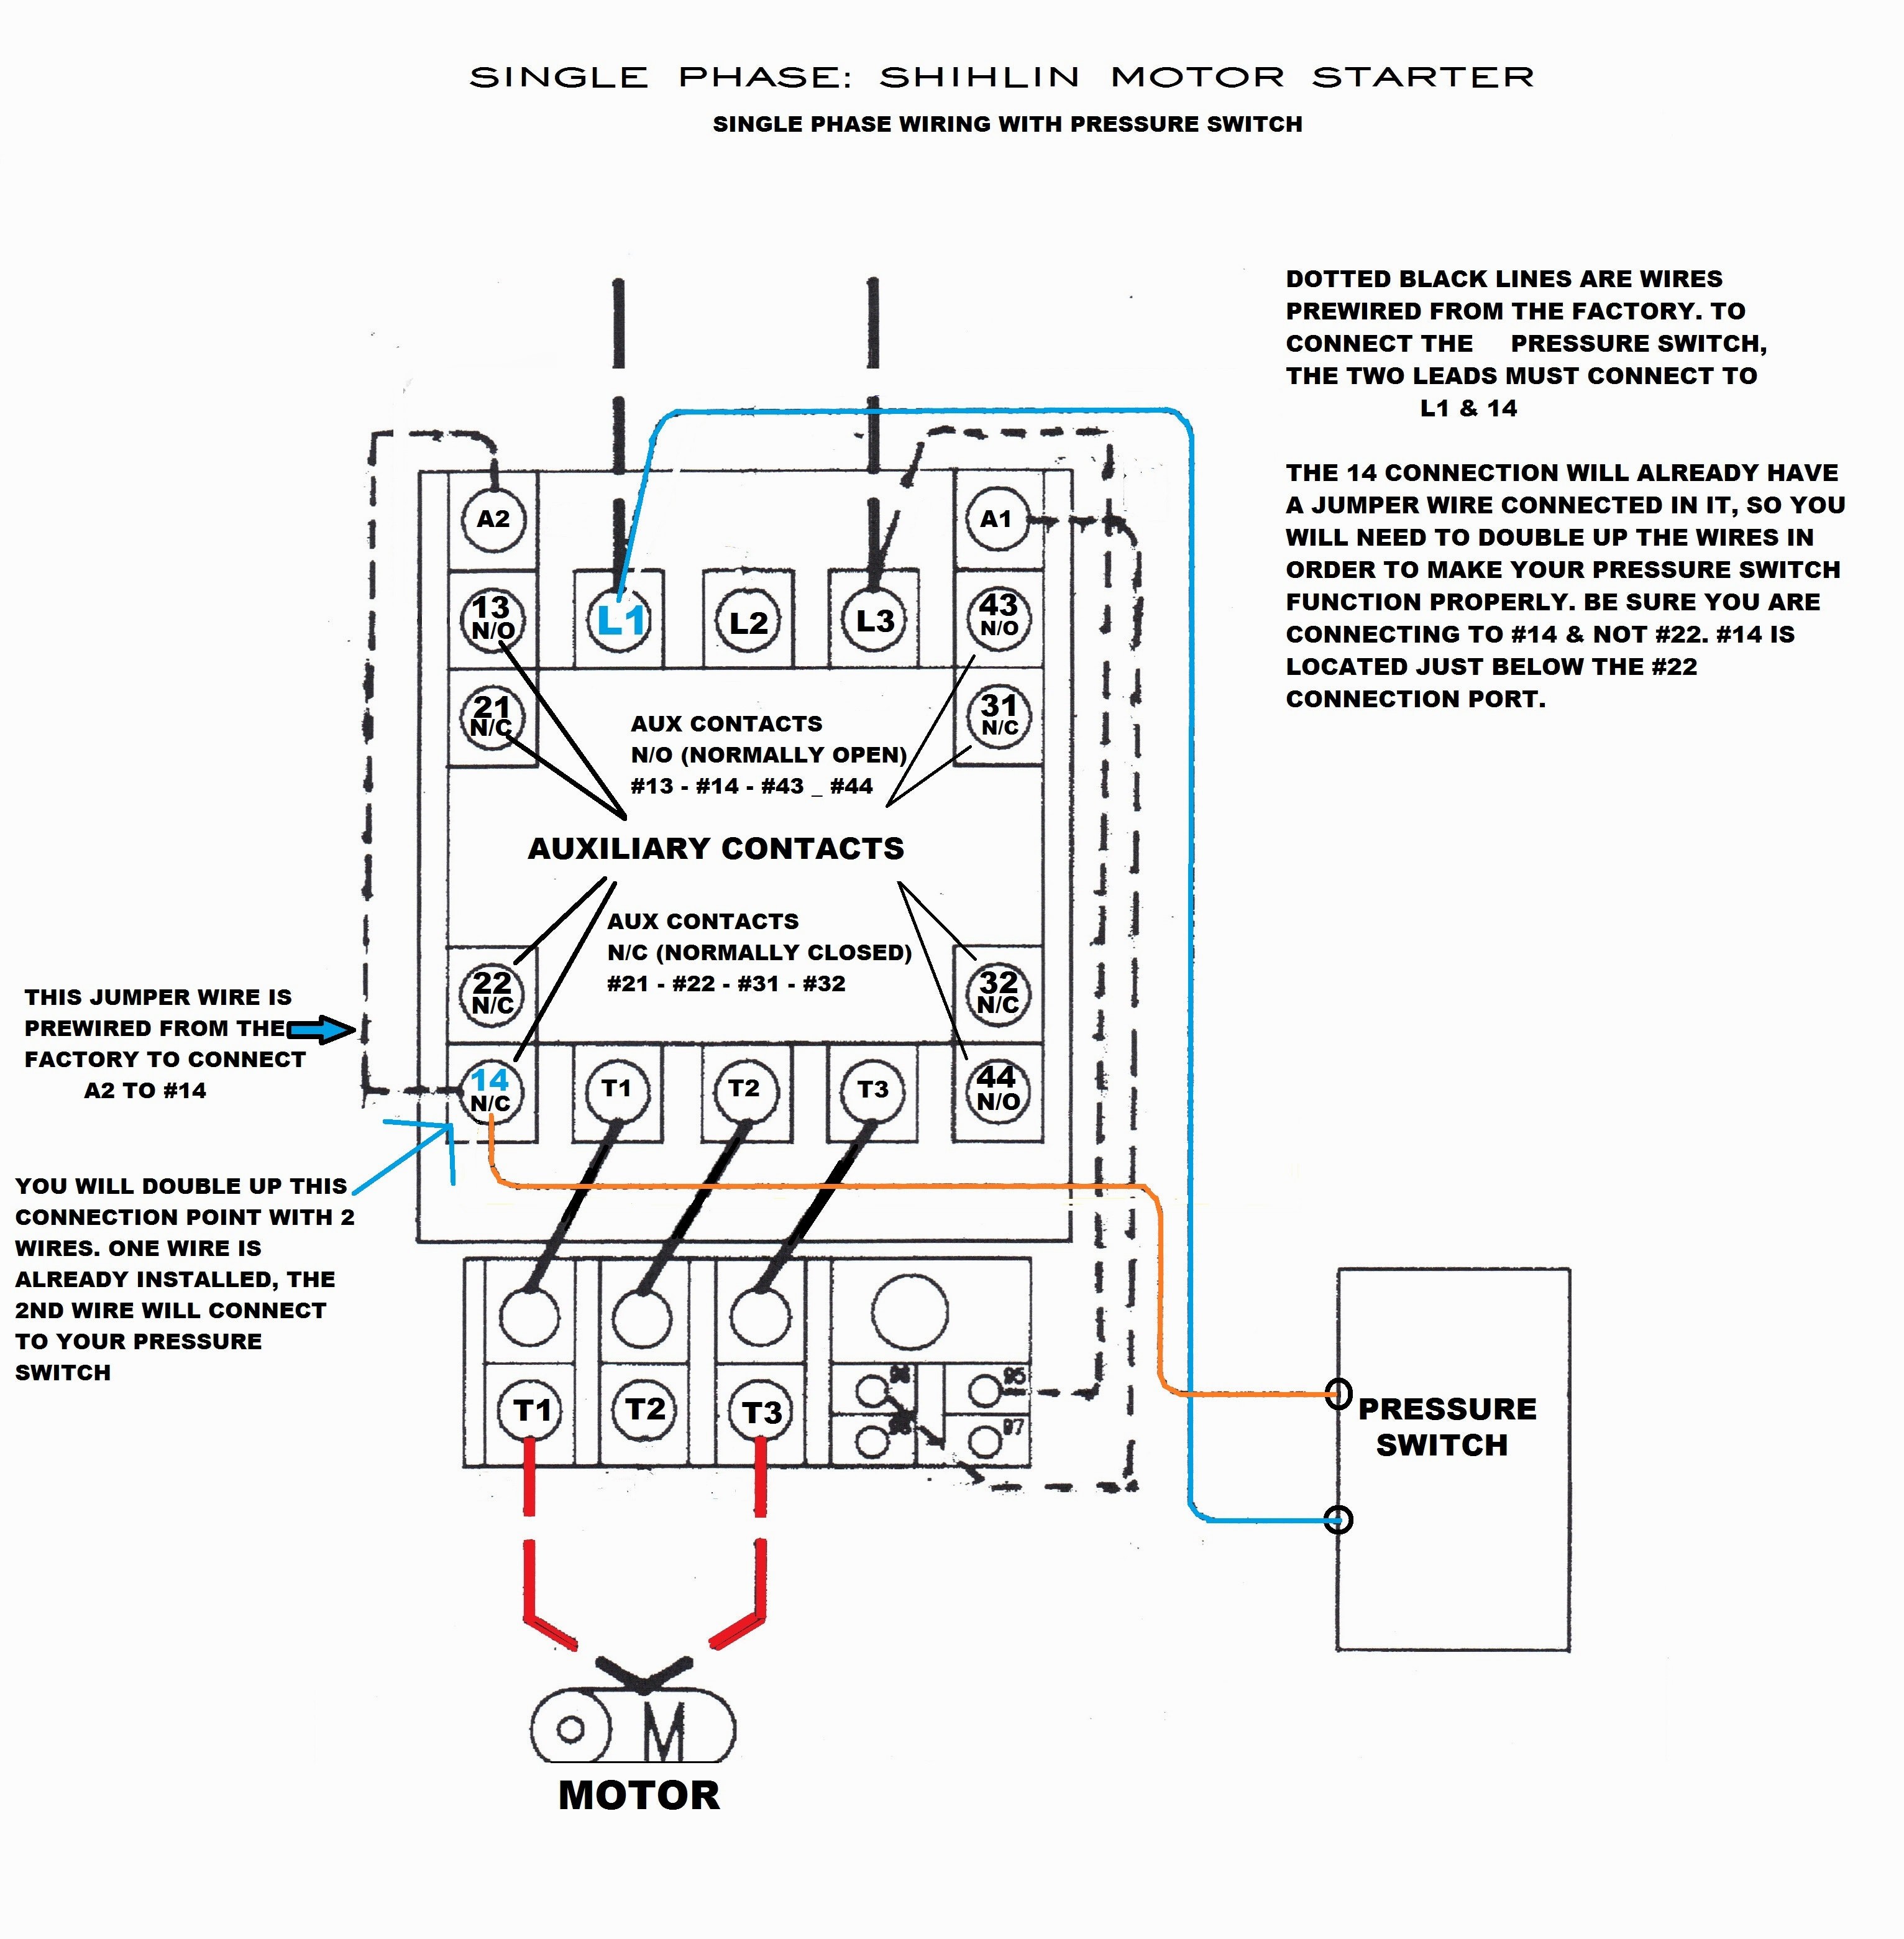 Square D Magnetic Starter Wiring Diagram Wire Diagram 17 D Wiring Diagram toolbox Of Square D Magnetic Starter Wiring Diagram